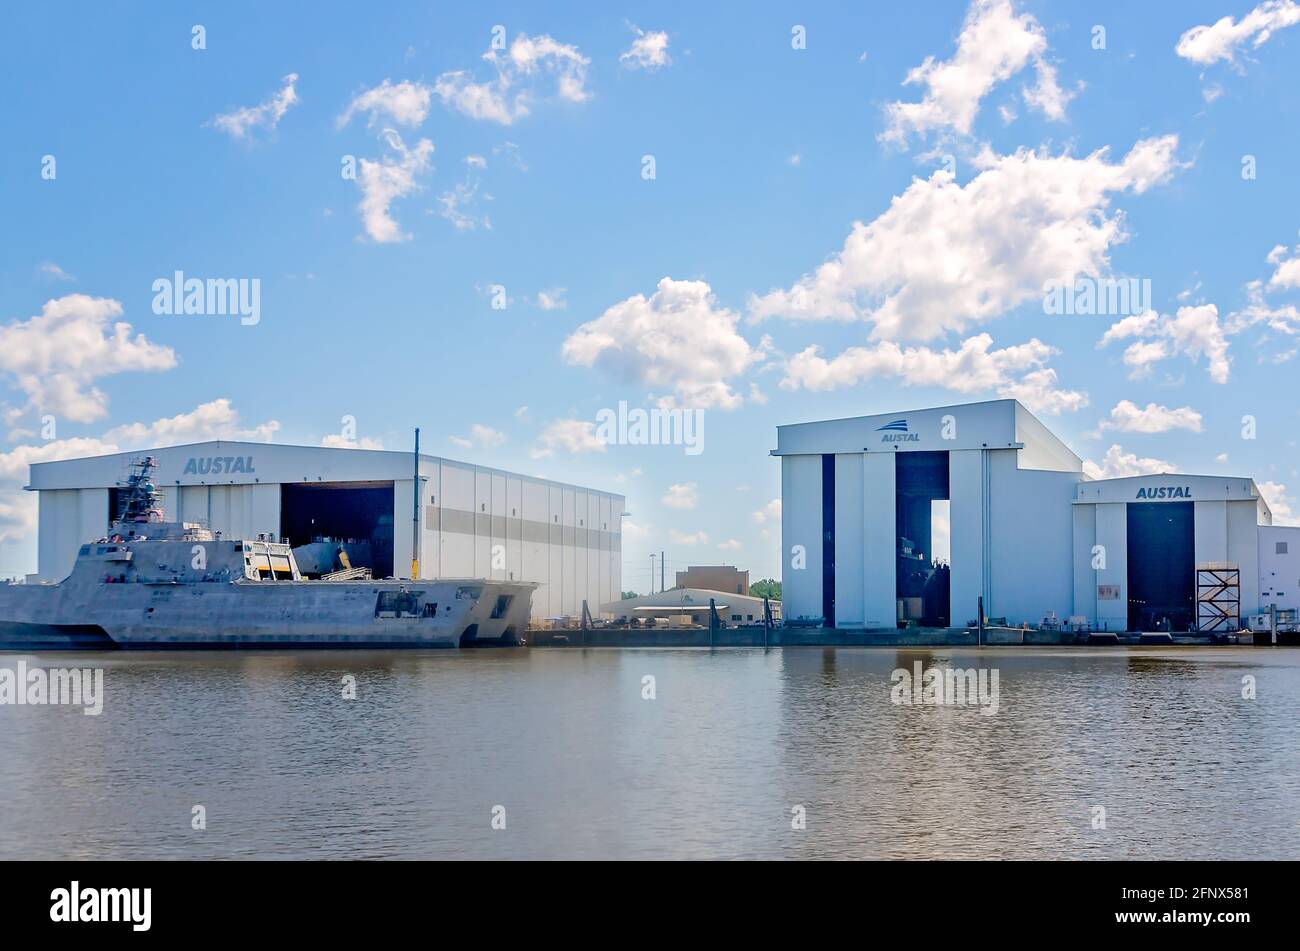 USS Canberra (LCS 30), a littoral combat ship, is docked at Austal USA’s ship manufacturing facility on the Mobile River, May 14, 2021, in Mobile, Ala. Stock Photo